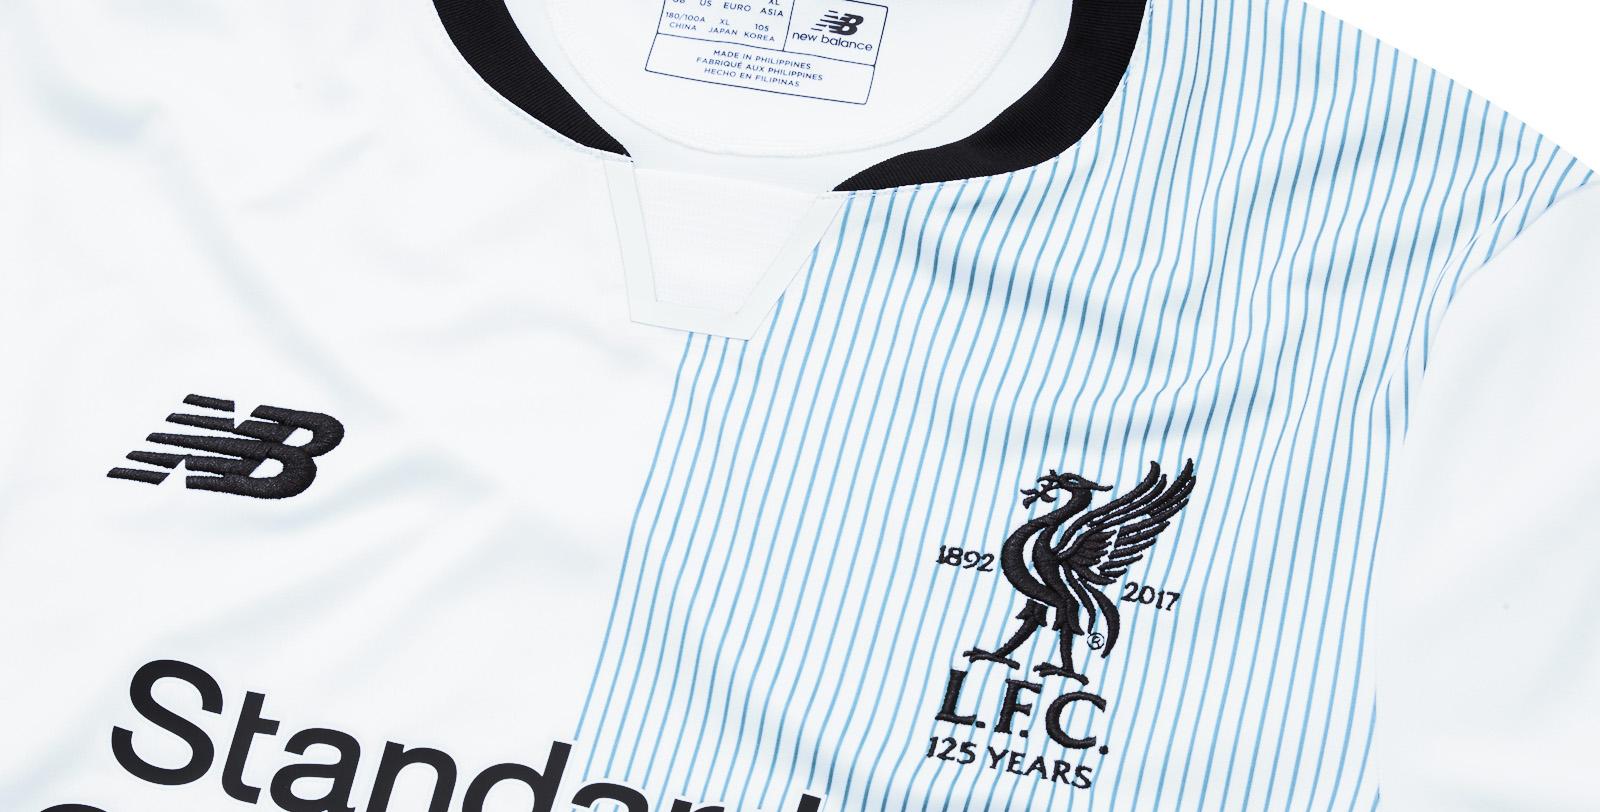 blue-commemorative-liverpool-17-18-away-jersey-1892-limited-edition